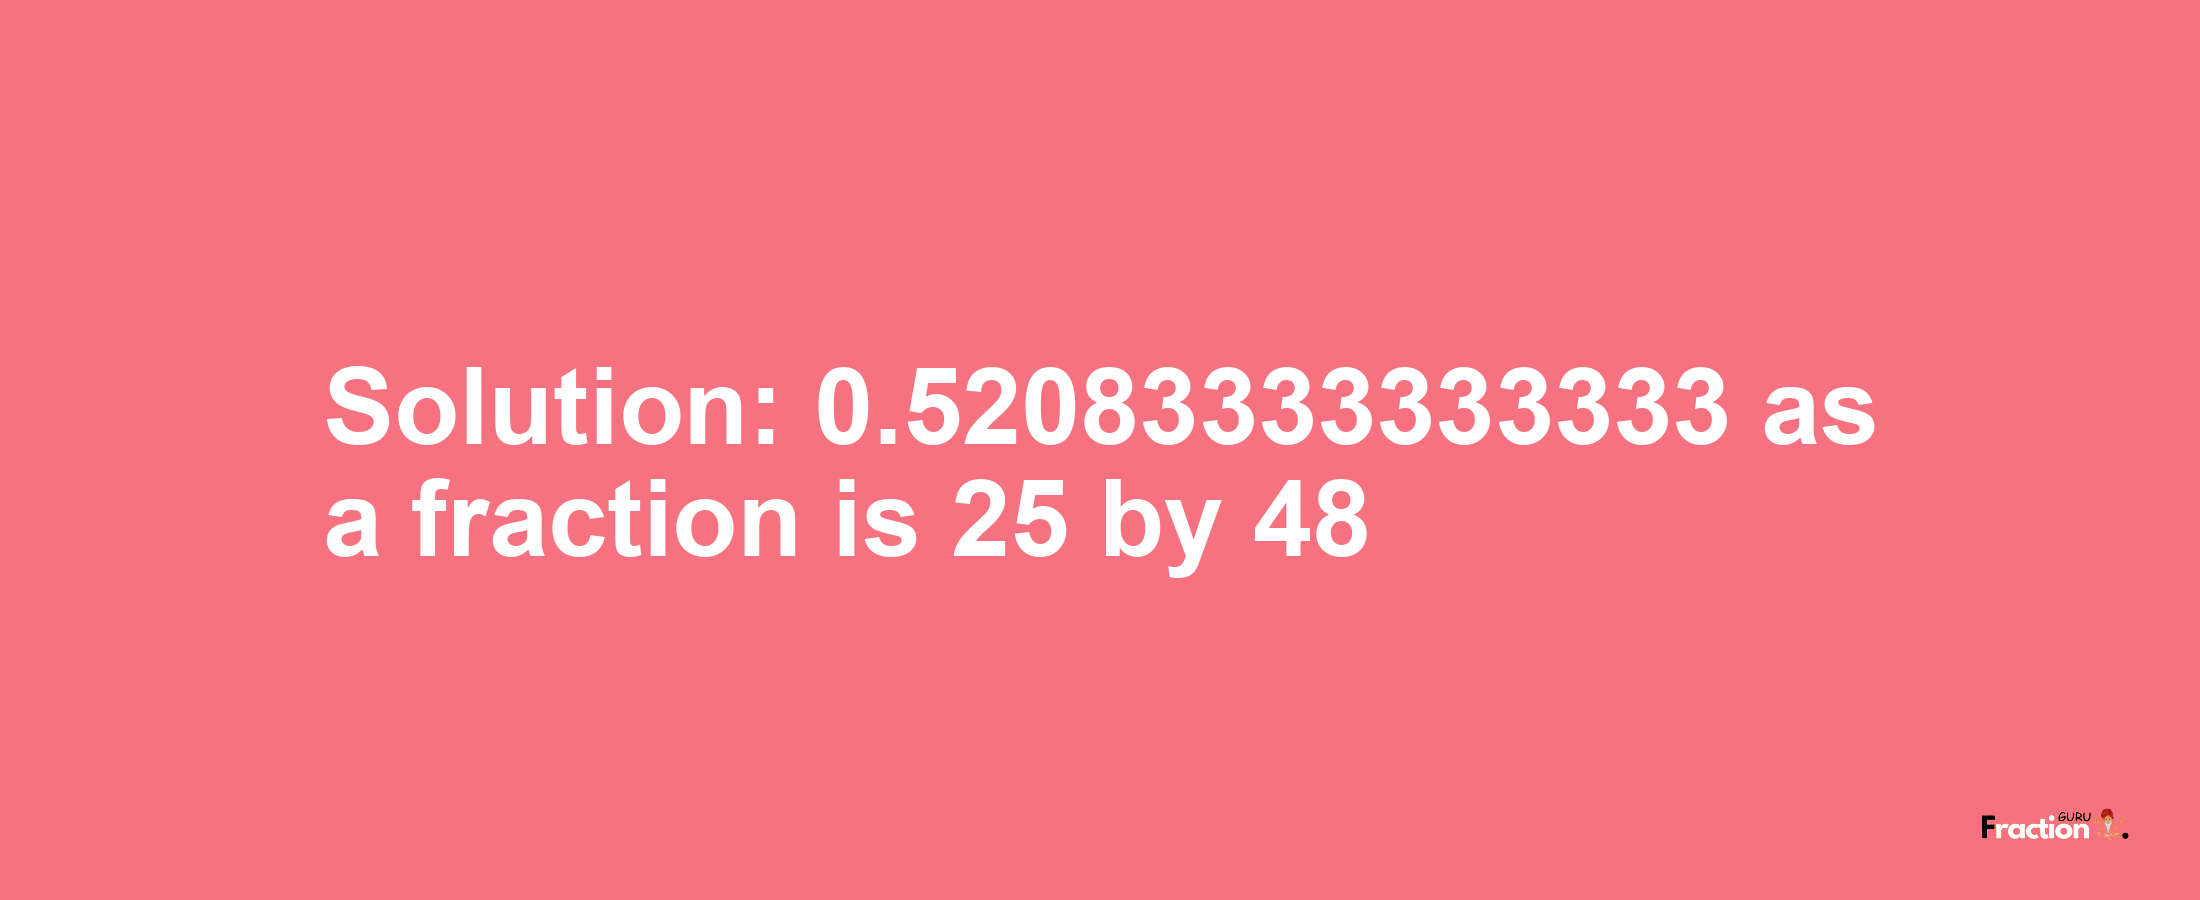 Solution:0.52083333333333 as a fraction is 25/48